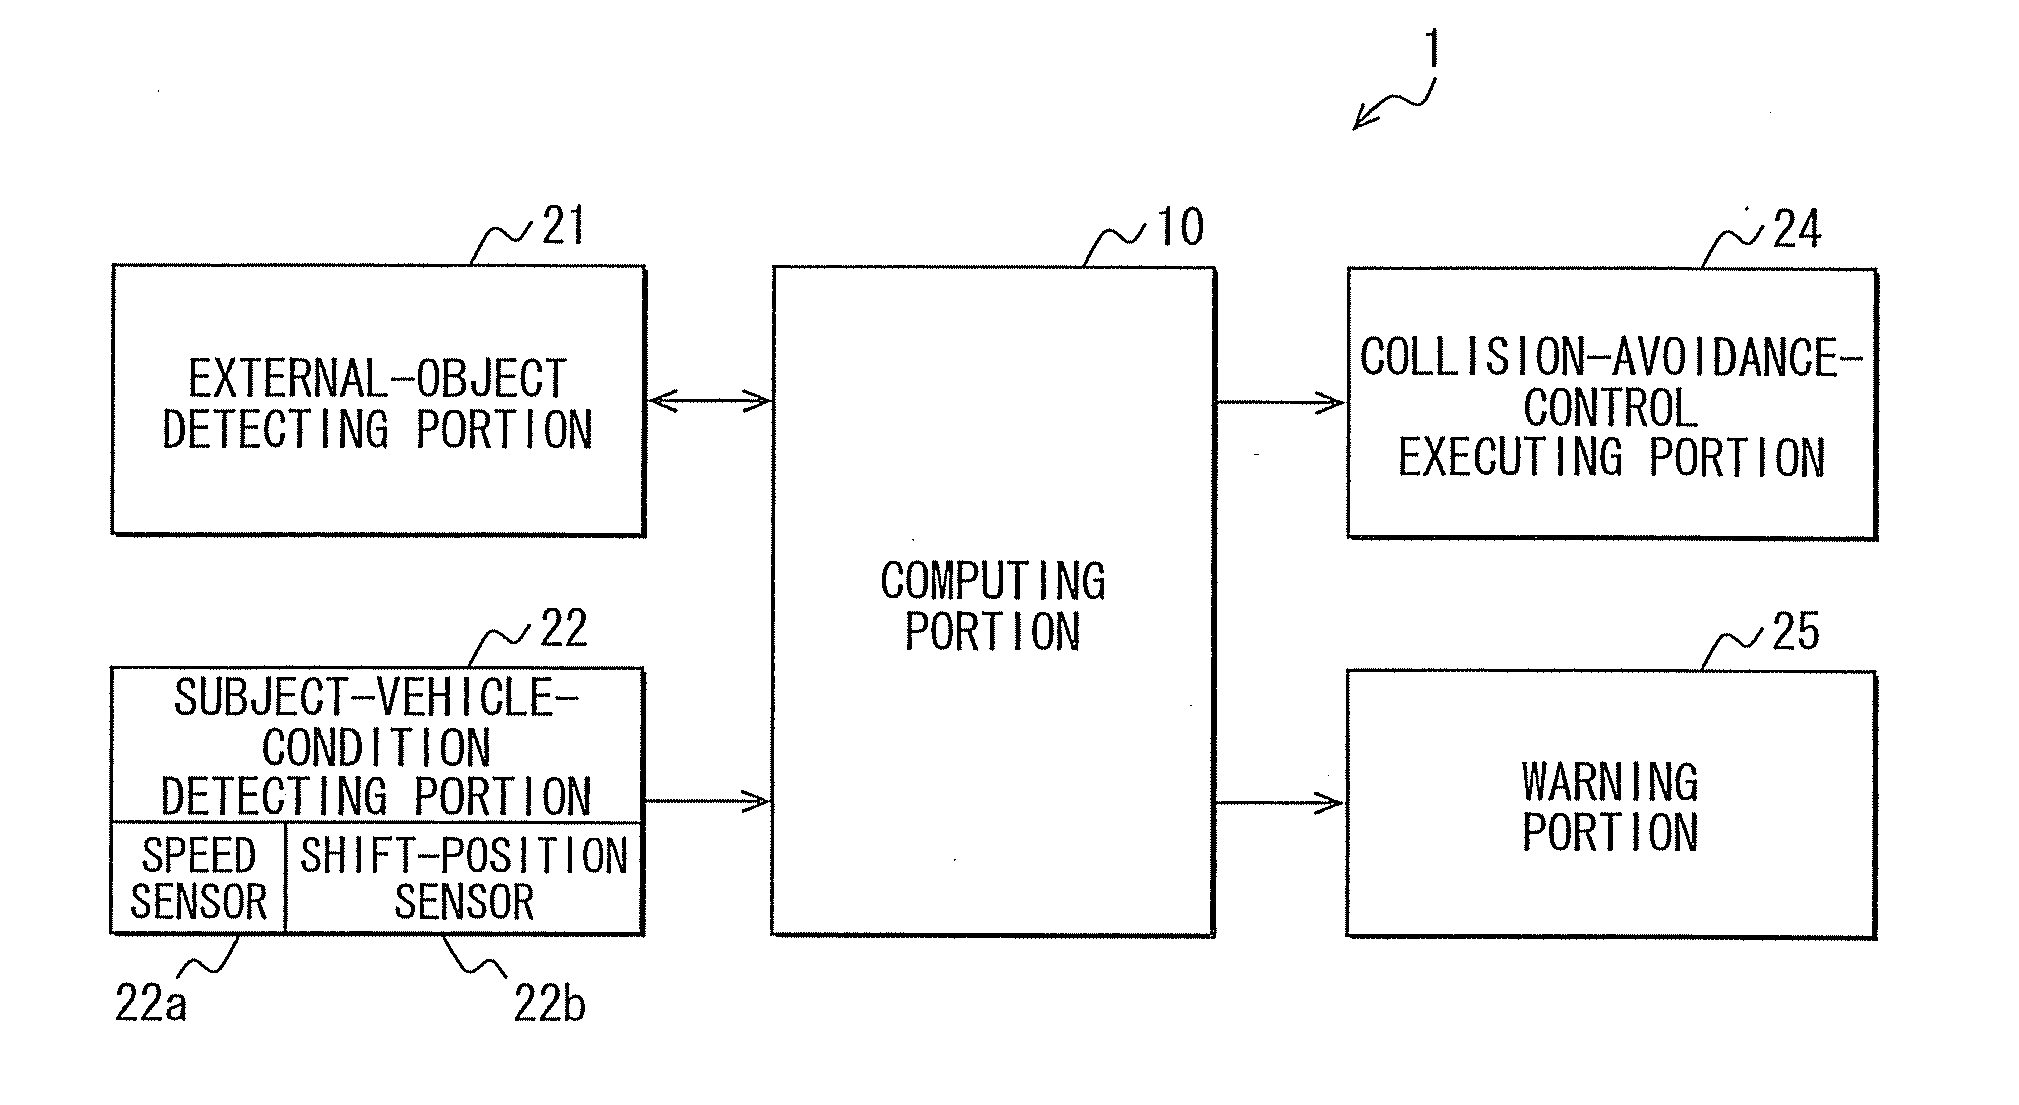 Collision detector and warning apparatus